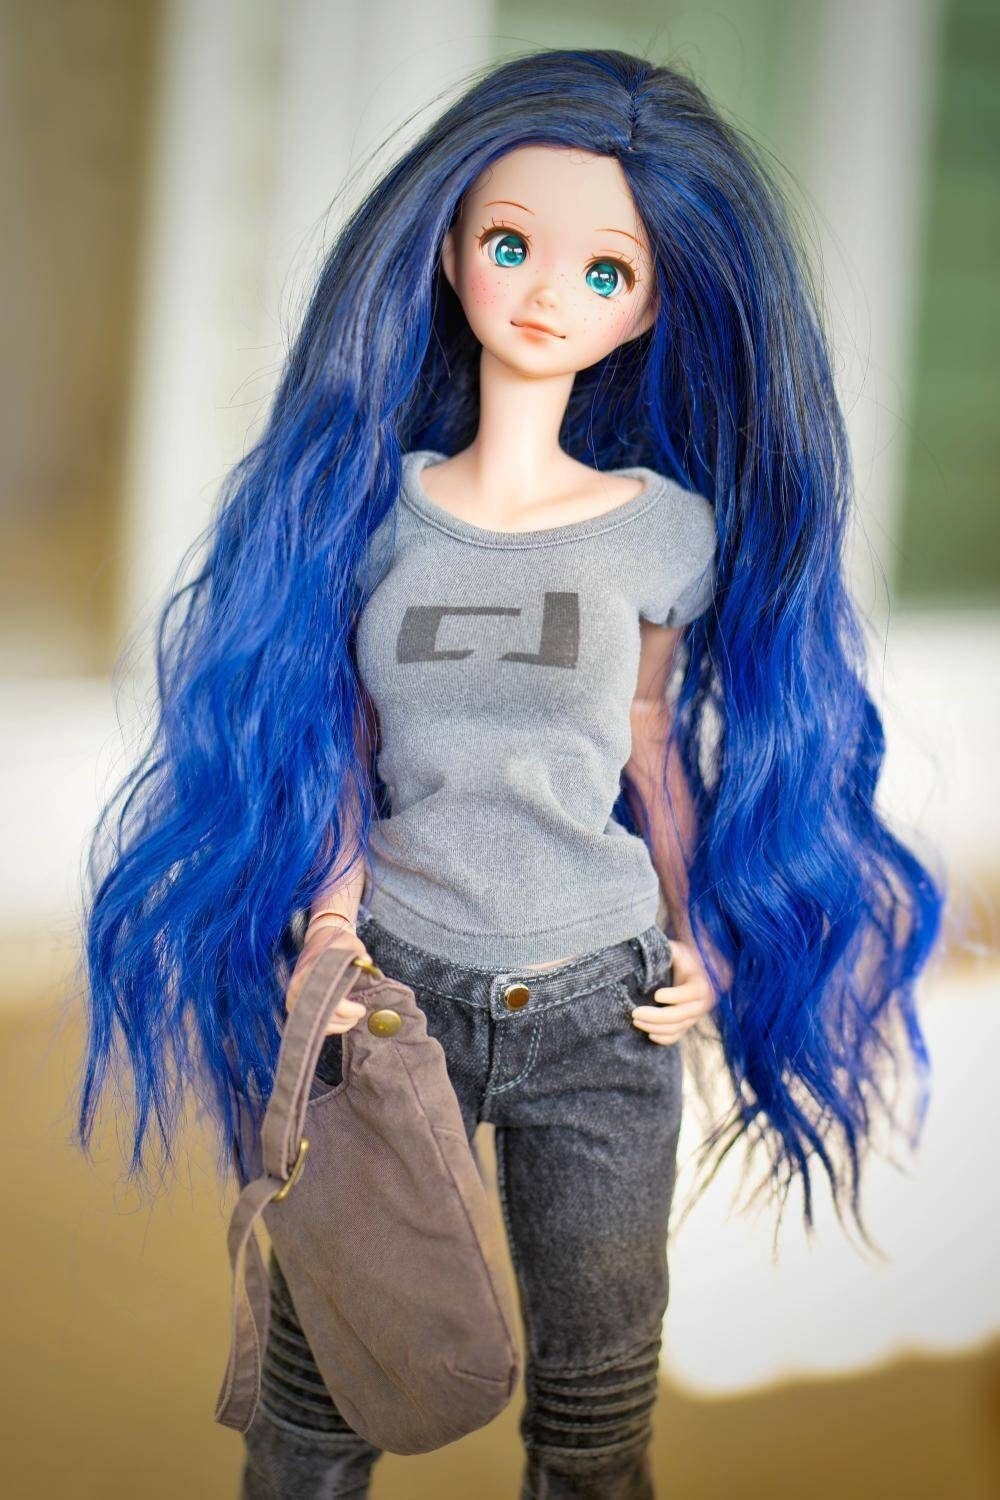 Custom doll Wig for Smart Dolls- Heat Safe - Tangle Resistant- 8.5" head size of Bjd, SD, Dollfie Dream dolls Blue dyed ombre